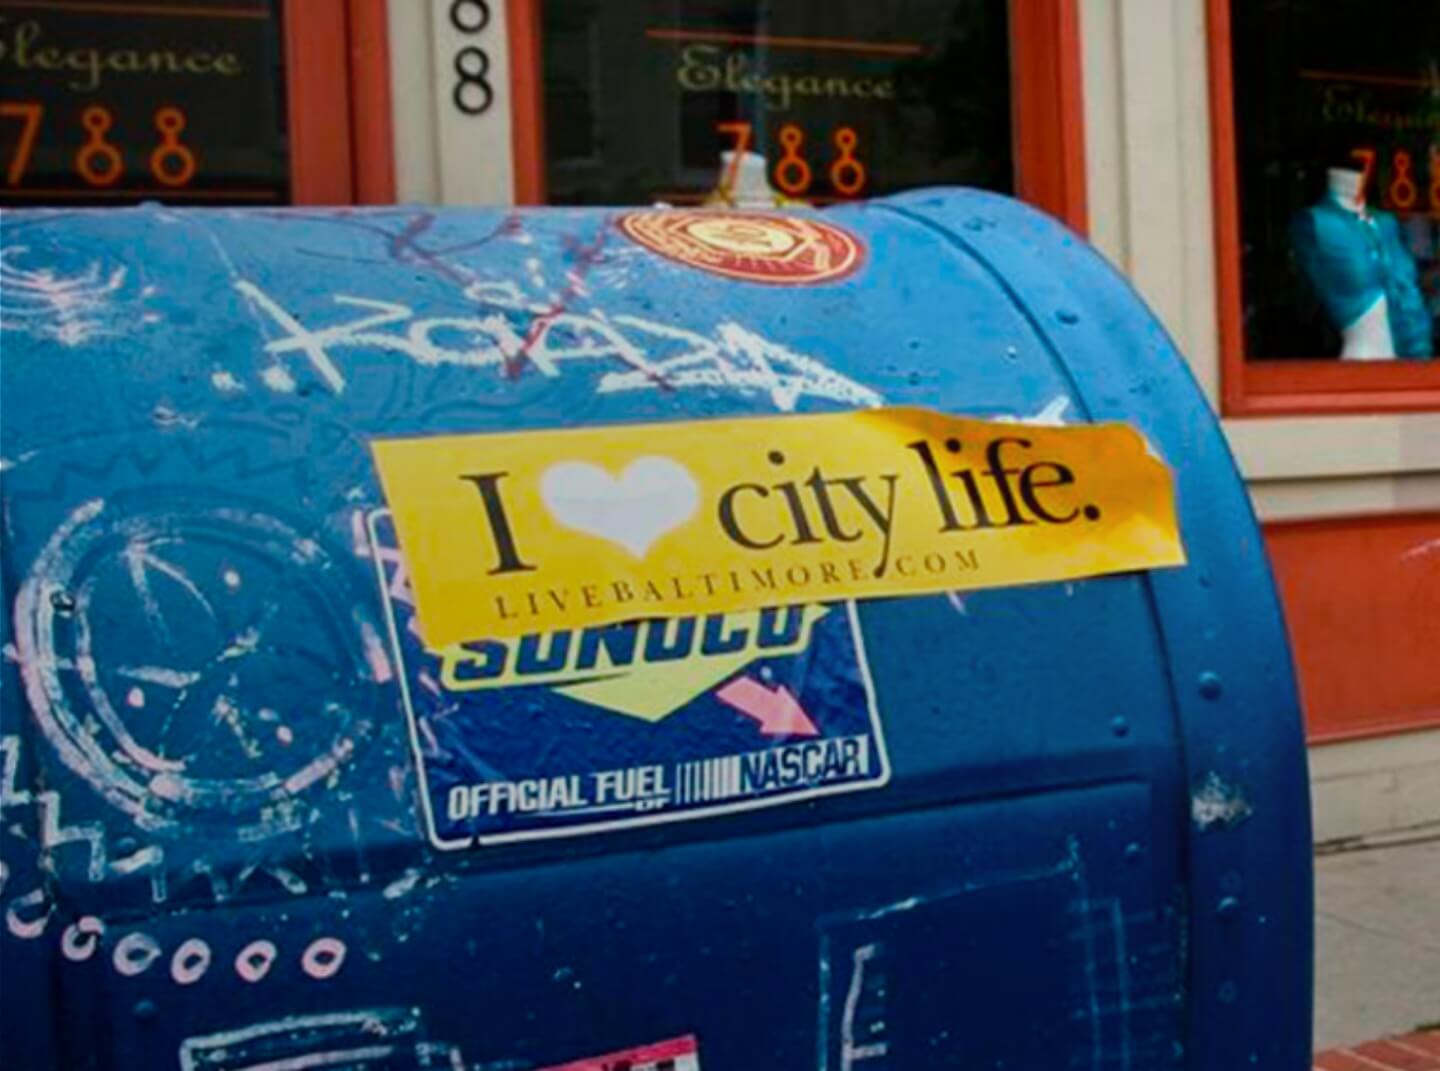 A Baltimore City mailbox with an "I Heart City Life" bumper sticker attached to it